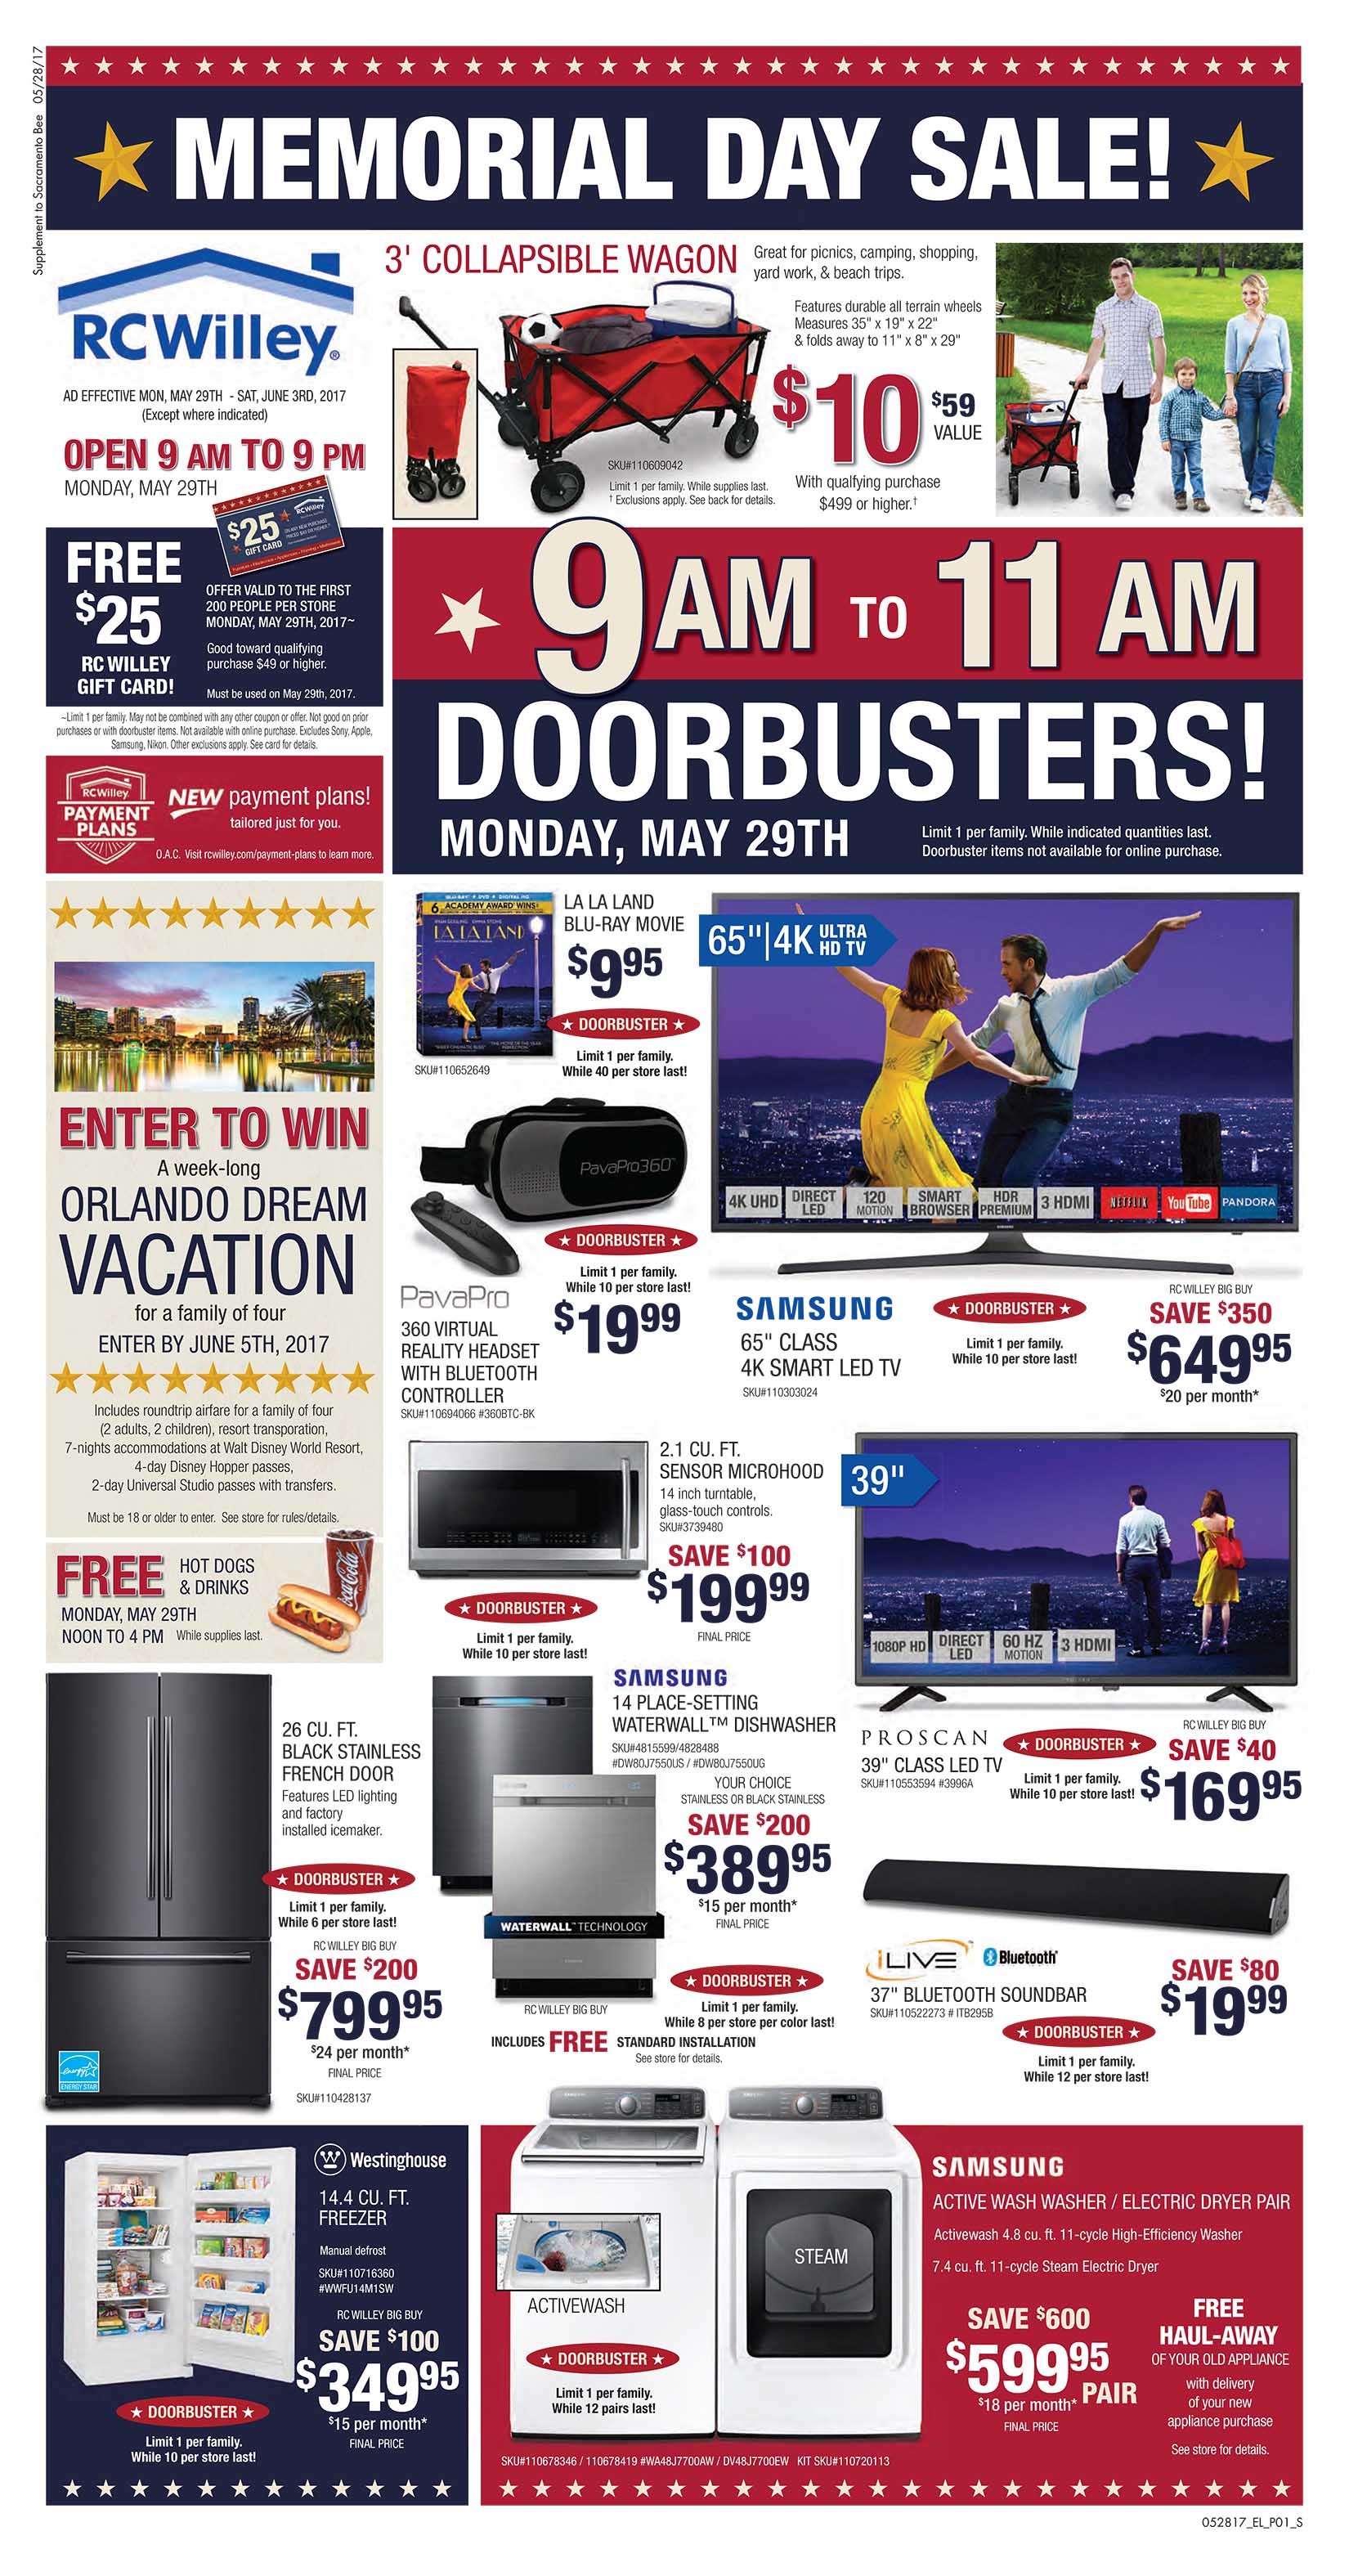 Memorial Day Electronics & Appliances Sale & Doorbusters! RC Willey